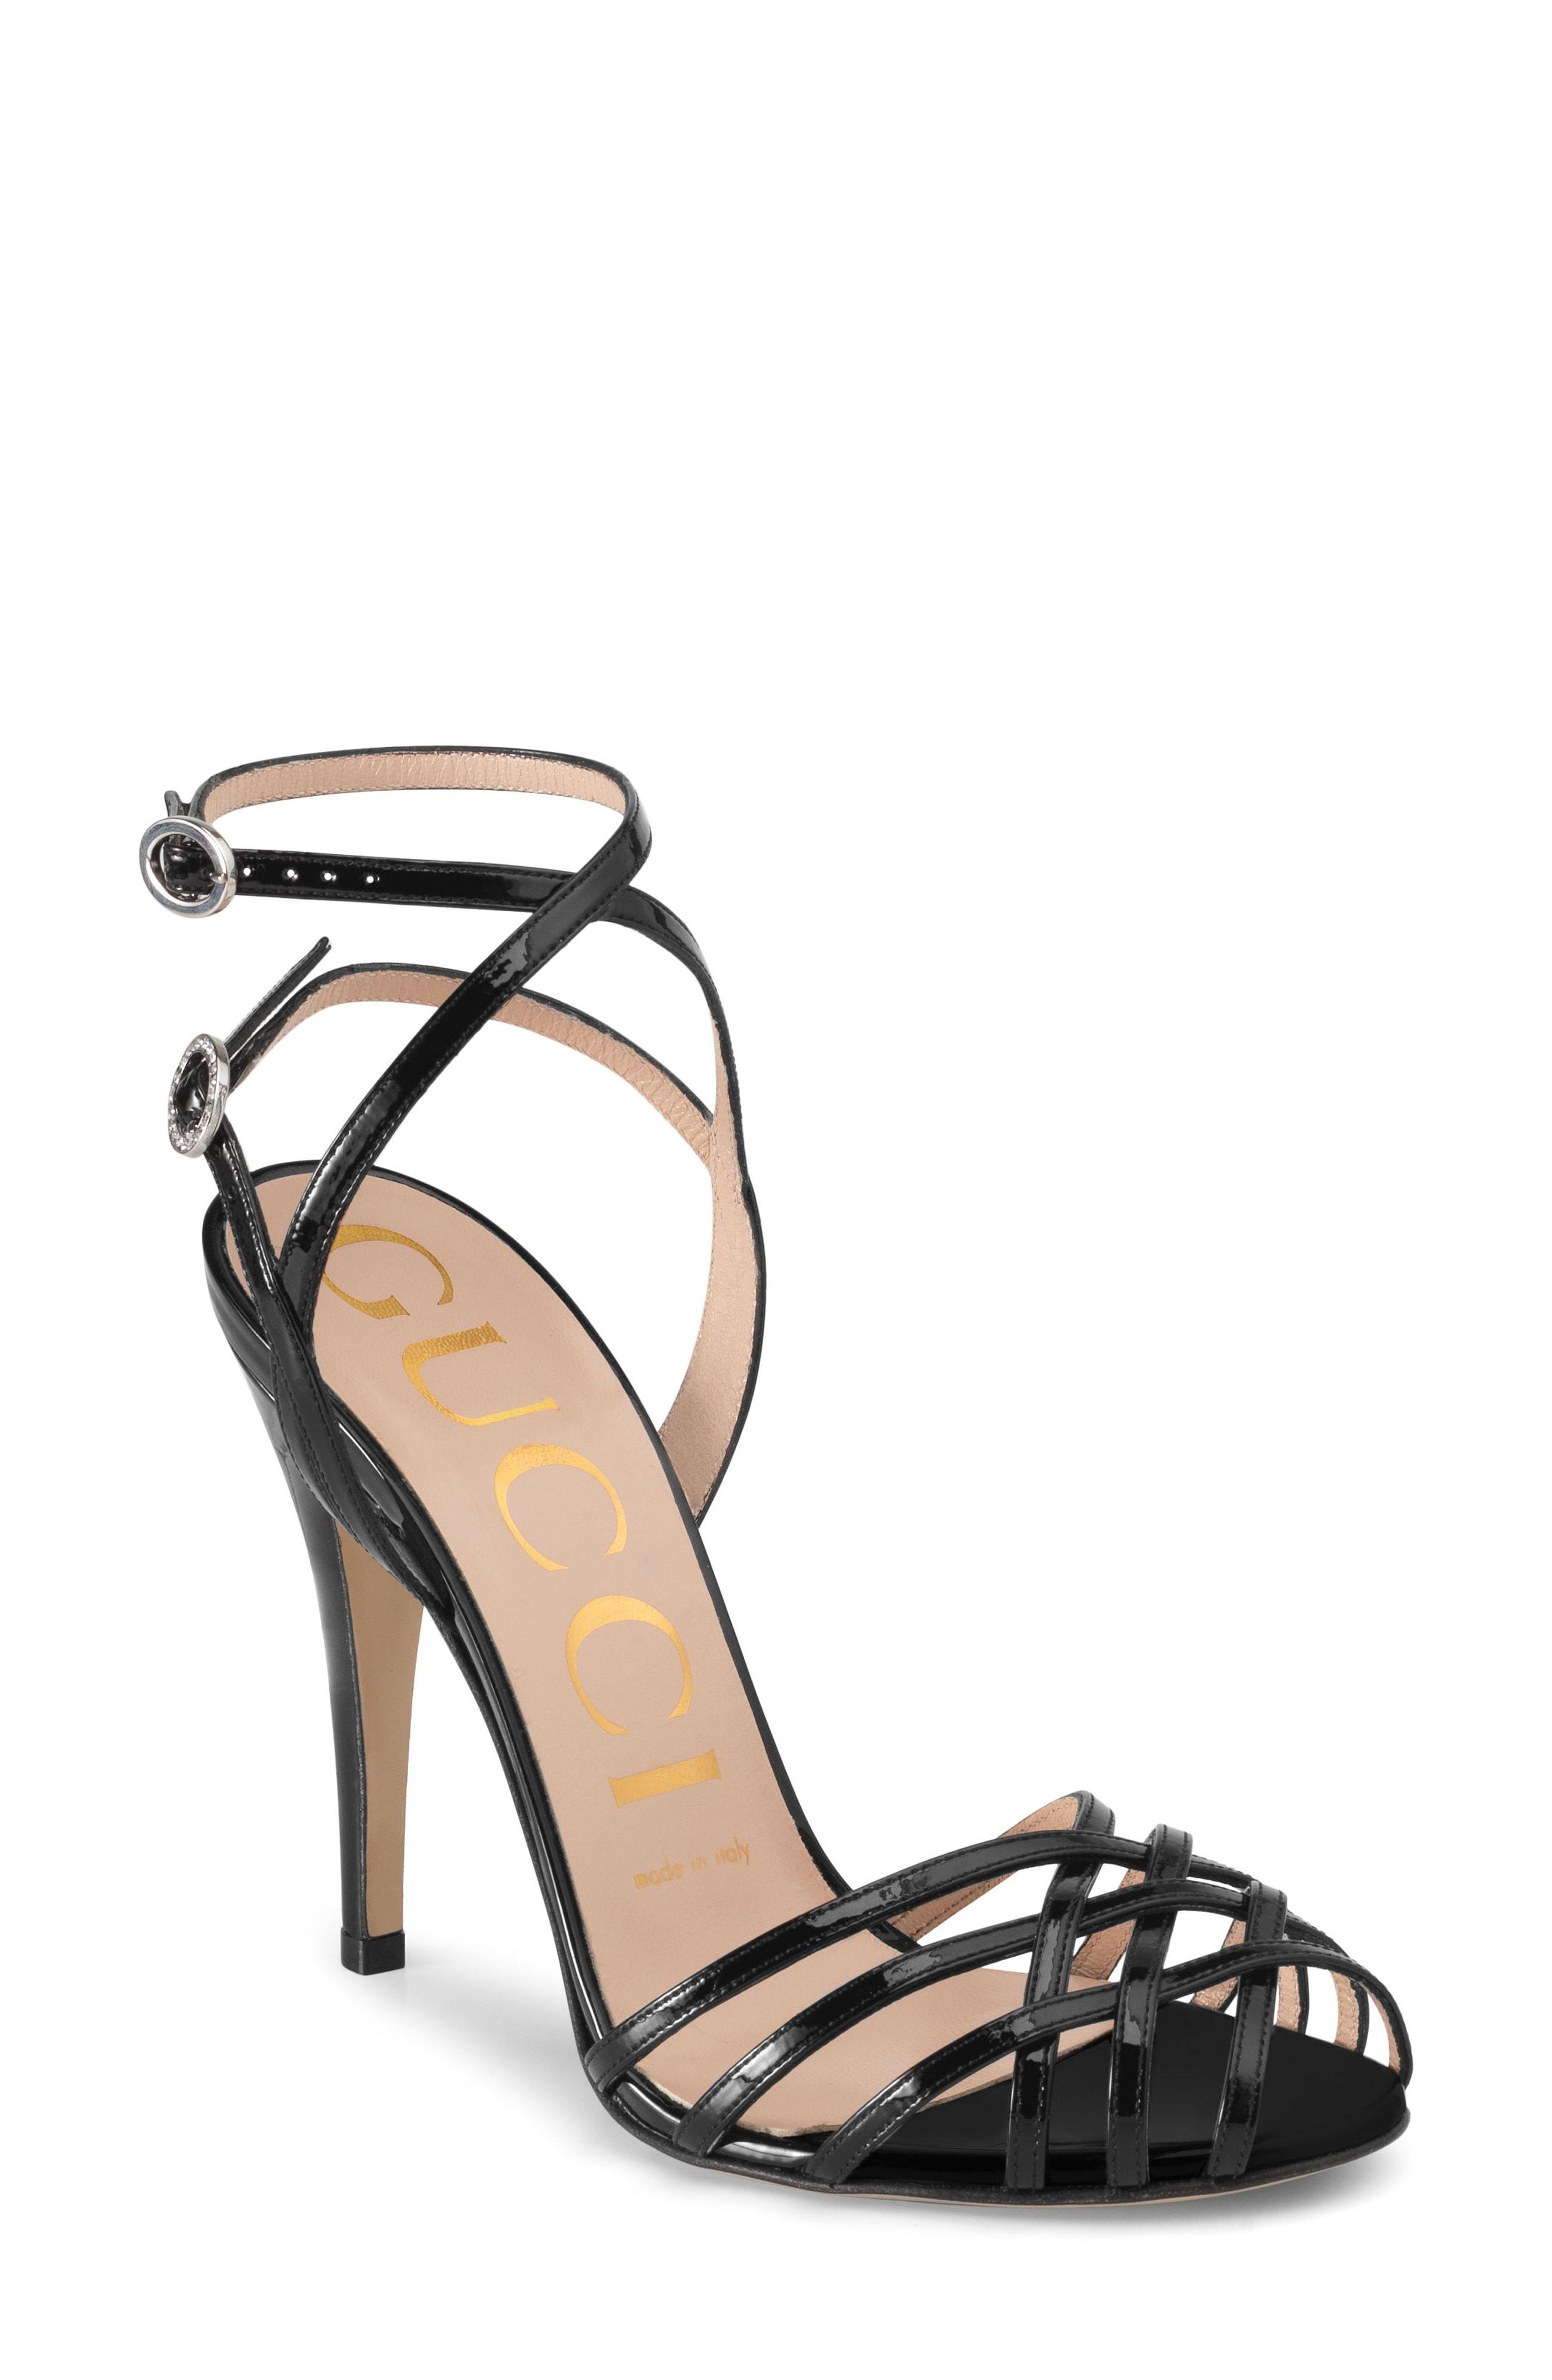 Gucci Draconia Ankle Strap Sandal in 